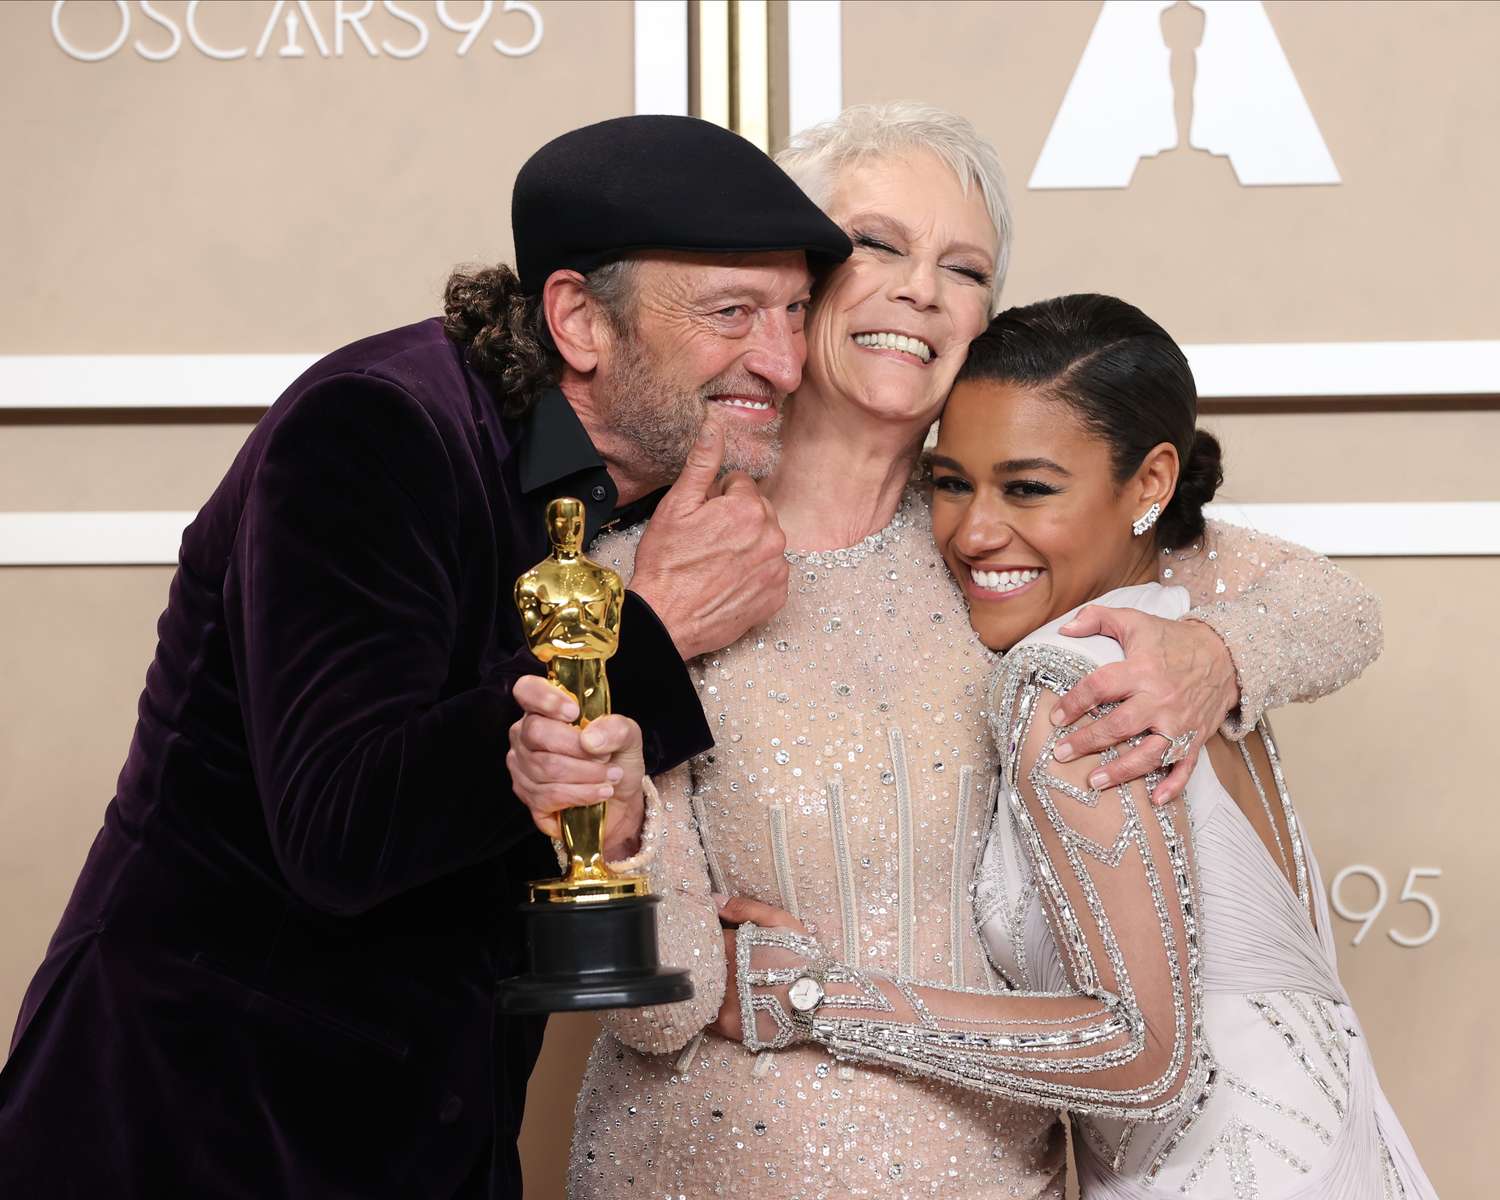 THE OSCARS® - The 95th Oscars® will air live from the Dolby® Theatre at Ovation Hollywood on ABC and broadcast outlets worldwide on Sunday, March 12, 2023, at 8 p.m. EDT/5 p.m. PDT. (ABC)TROY KOTSUR, JAMIE LEE CURTIS, ARIANA DEBOSE